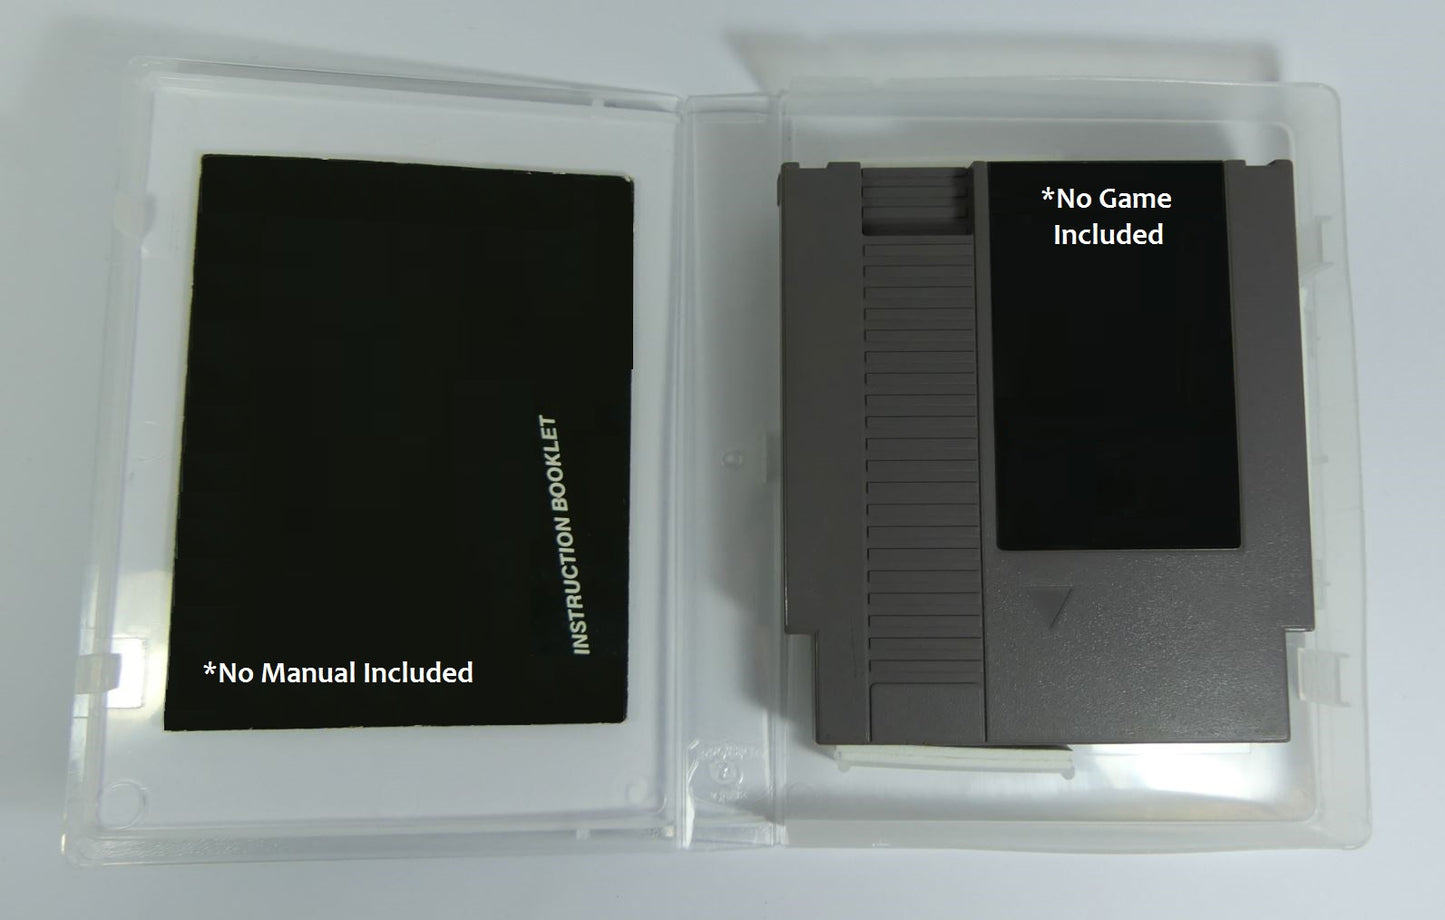 Shadowgate - NES Replacement Case